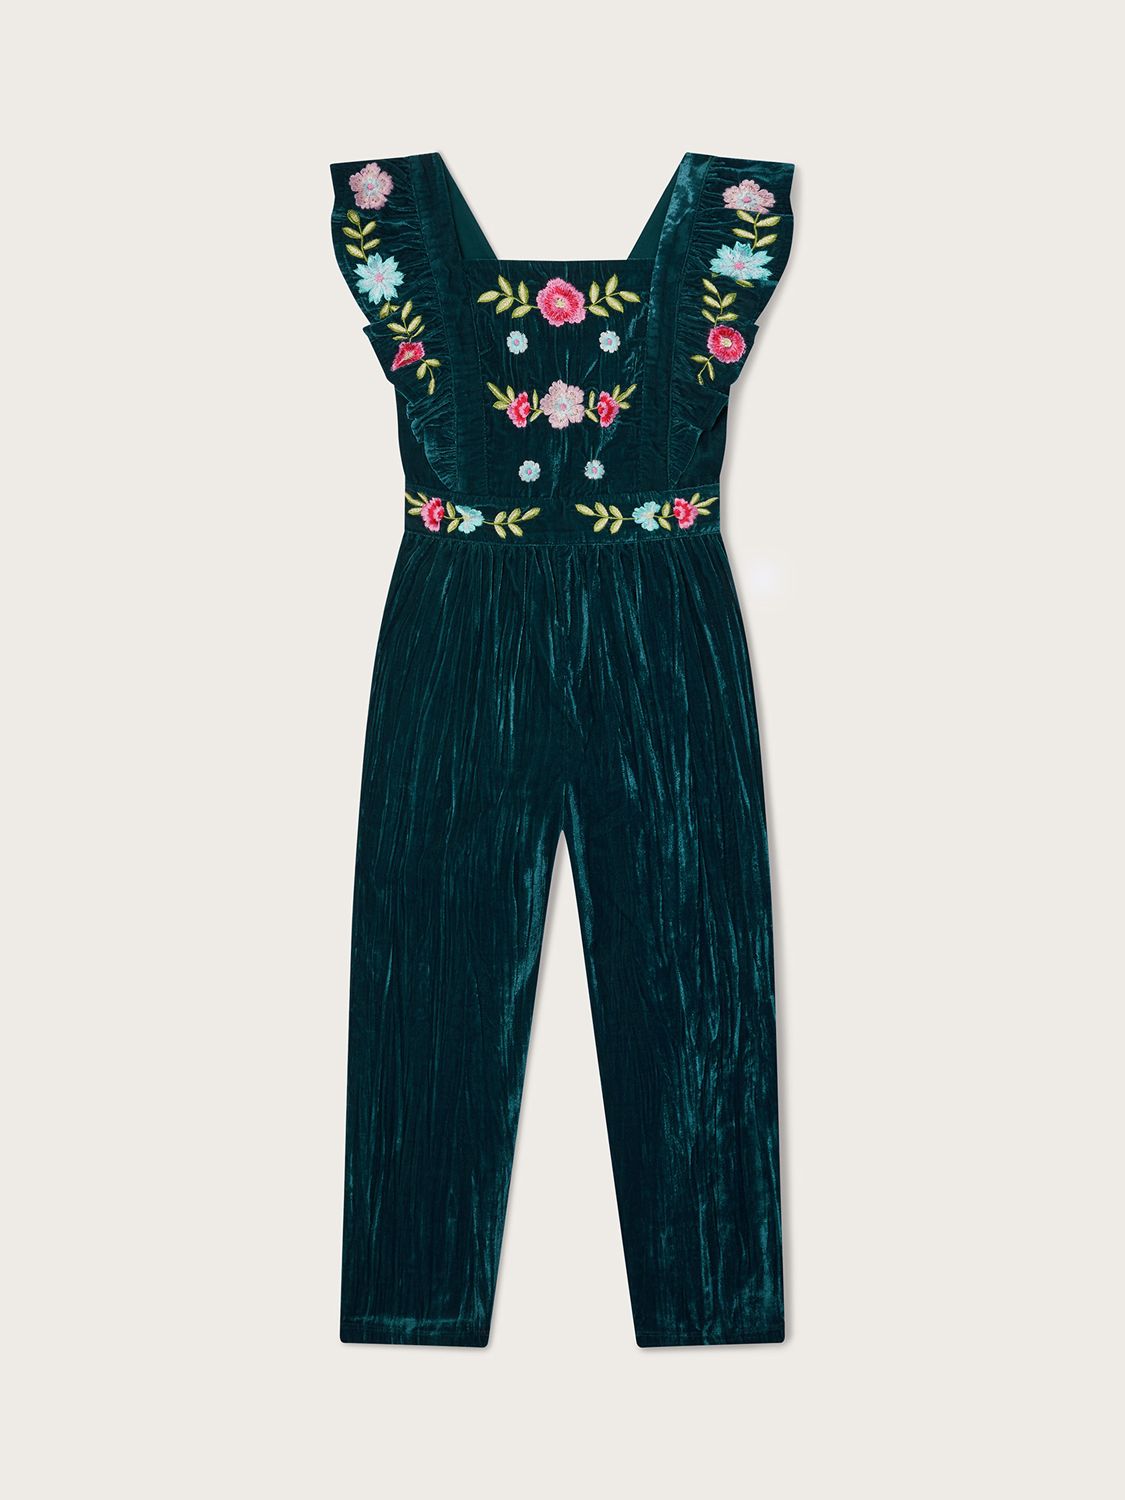 Monsoon Kids' Boutique Floral Embroidered Dungarees, Teal, 9-10 years